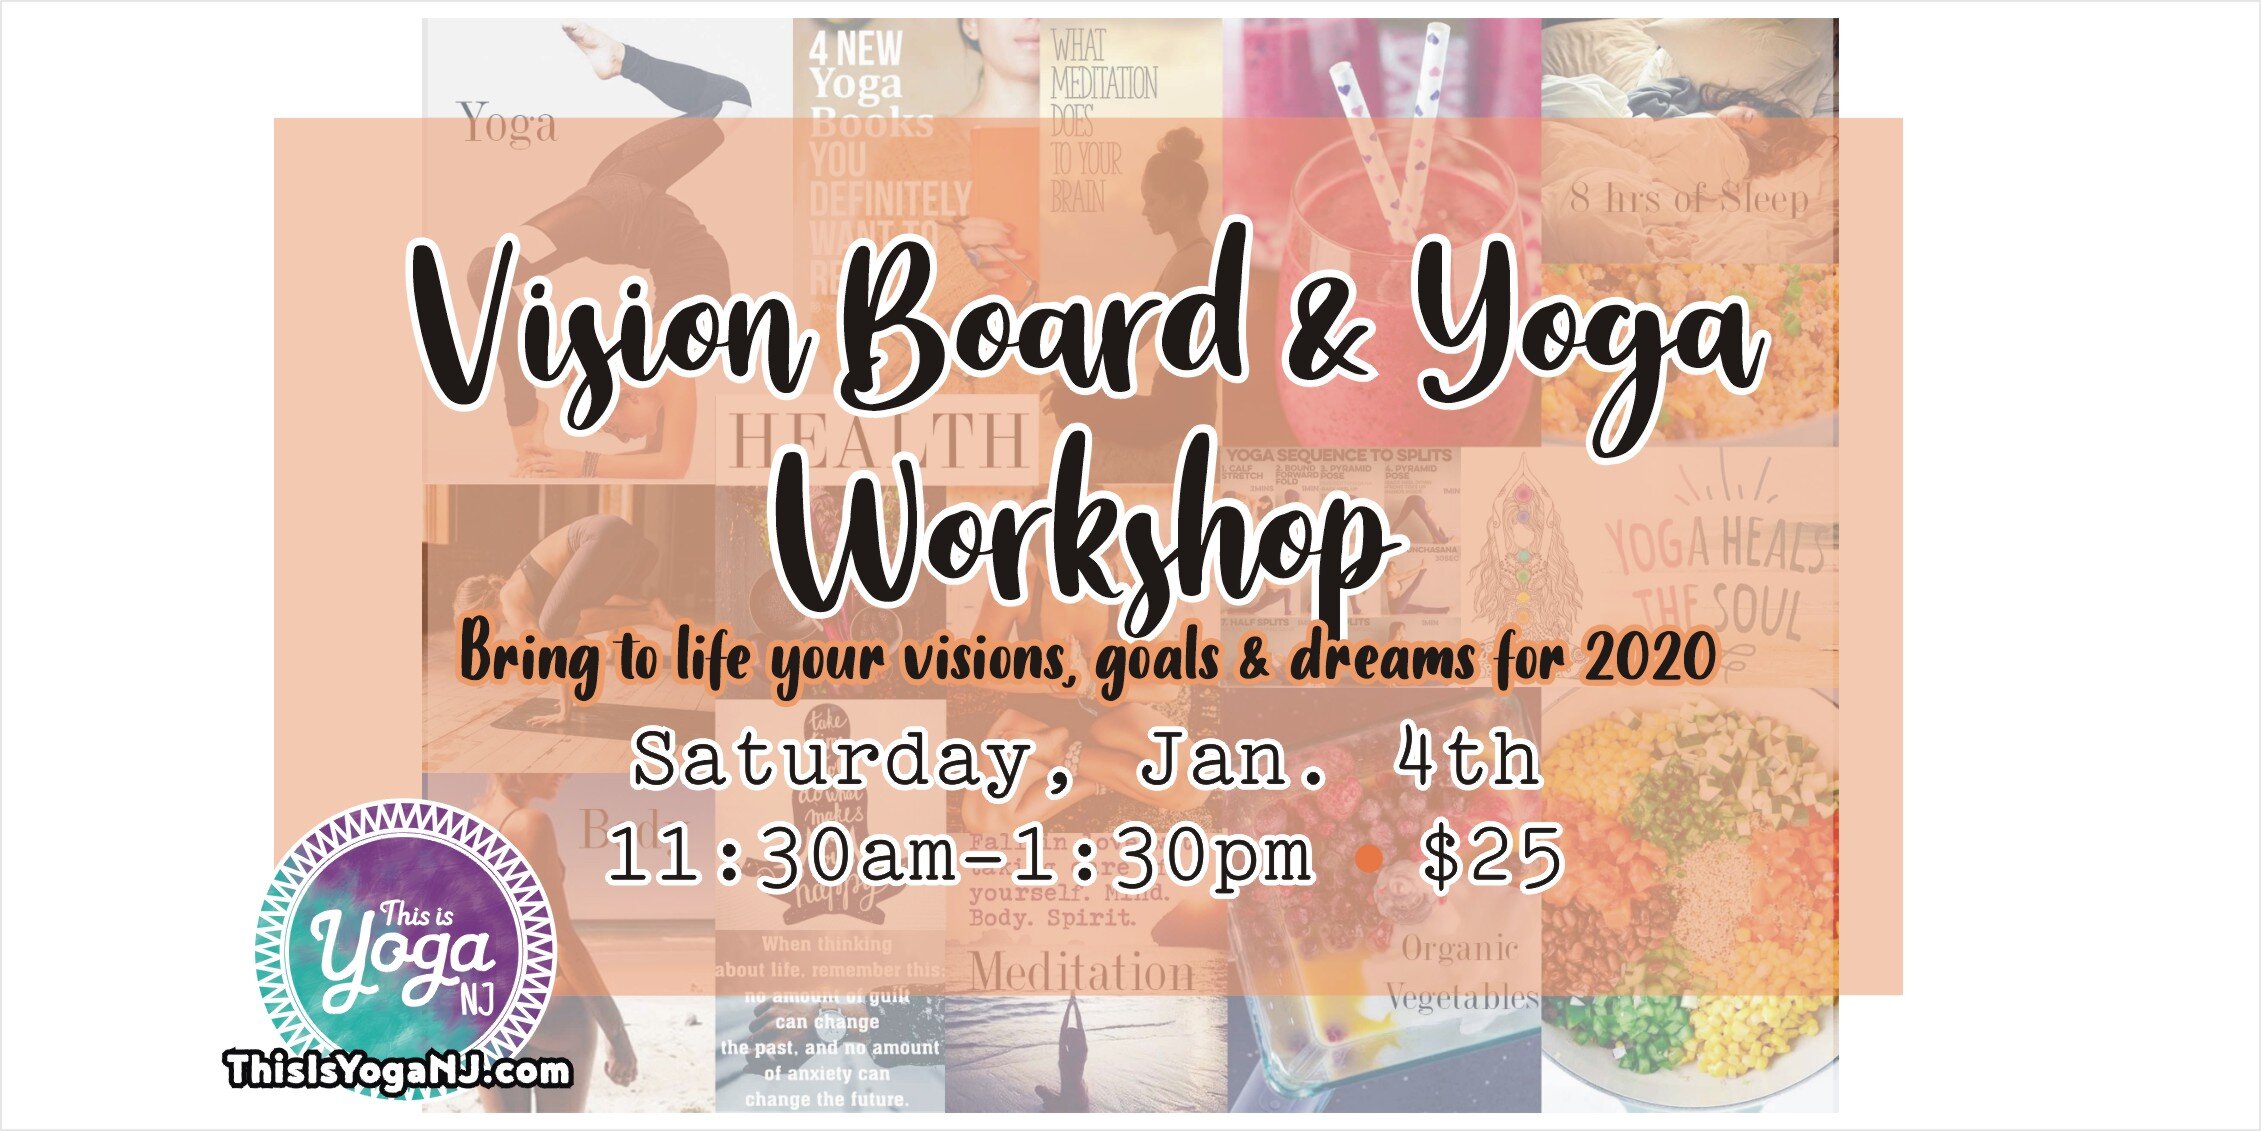 Release and Envision Vision Board Workshop